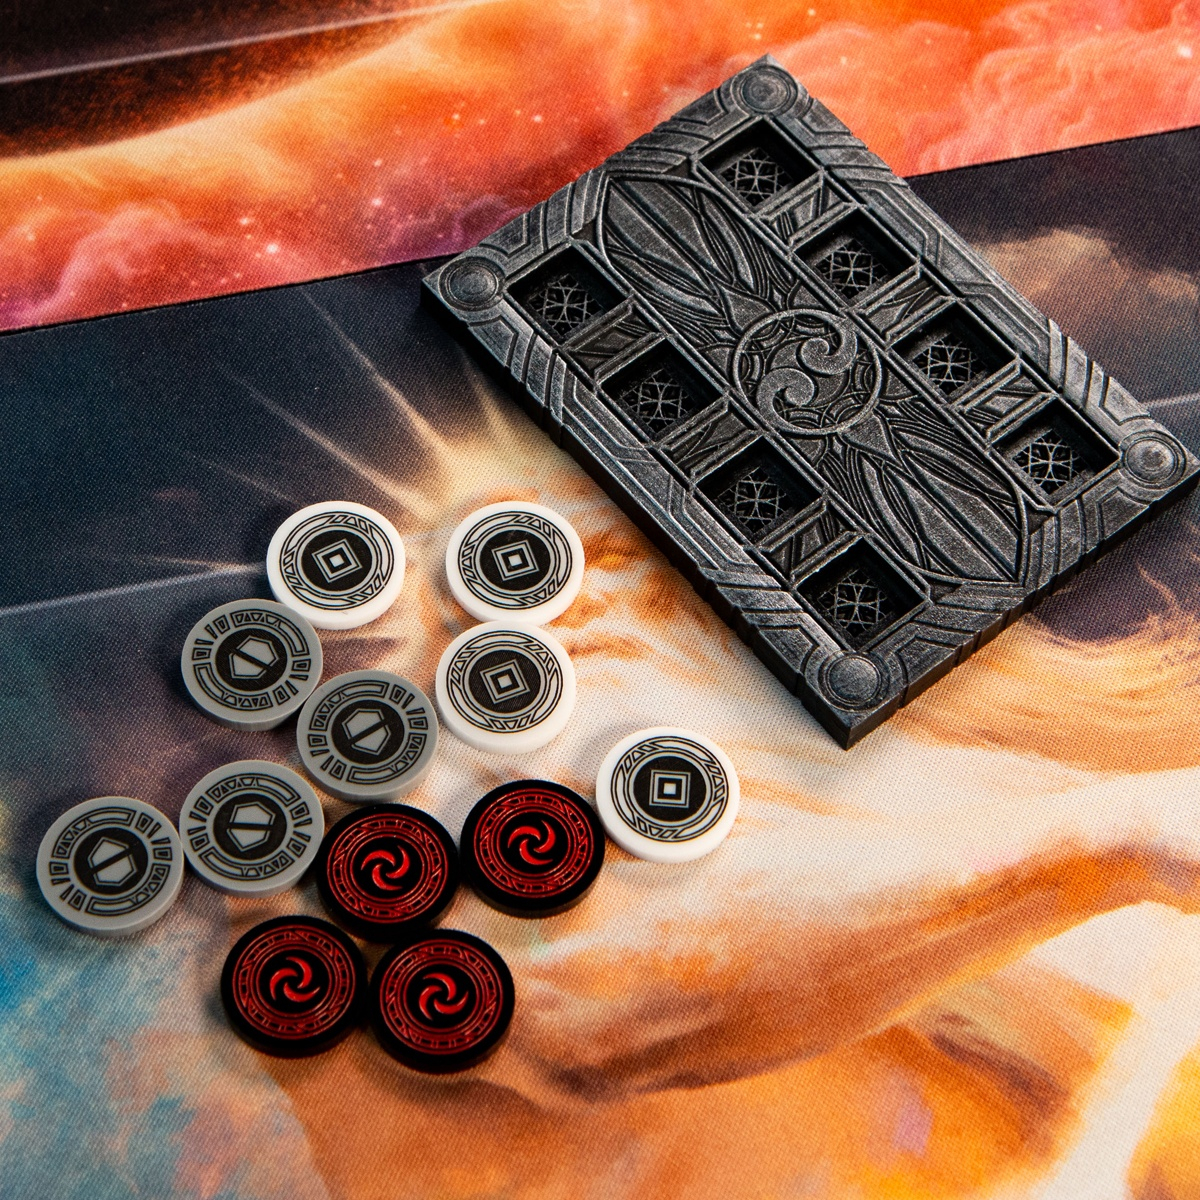 Armor Tokens, Activation Tokens, and Resource Tokens scattered to the left of a Majestic Dice Board and on top of a Flesh and Blood TCG Playmat